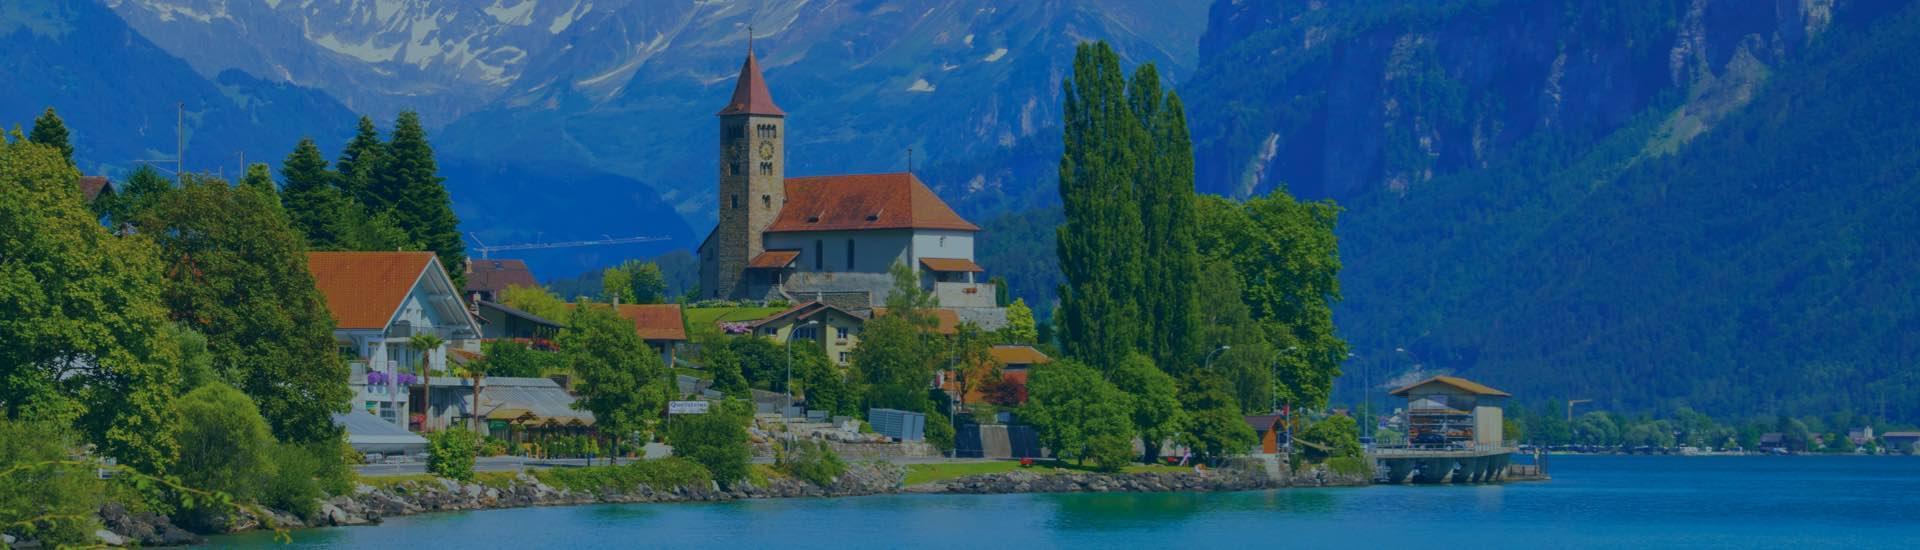 Find and Book Any Hotel in Interlaken